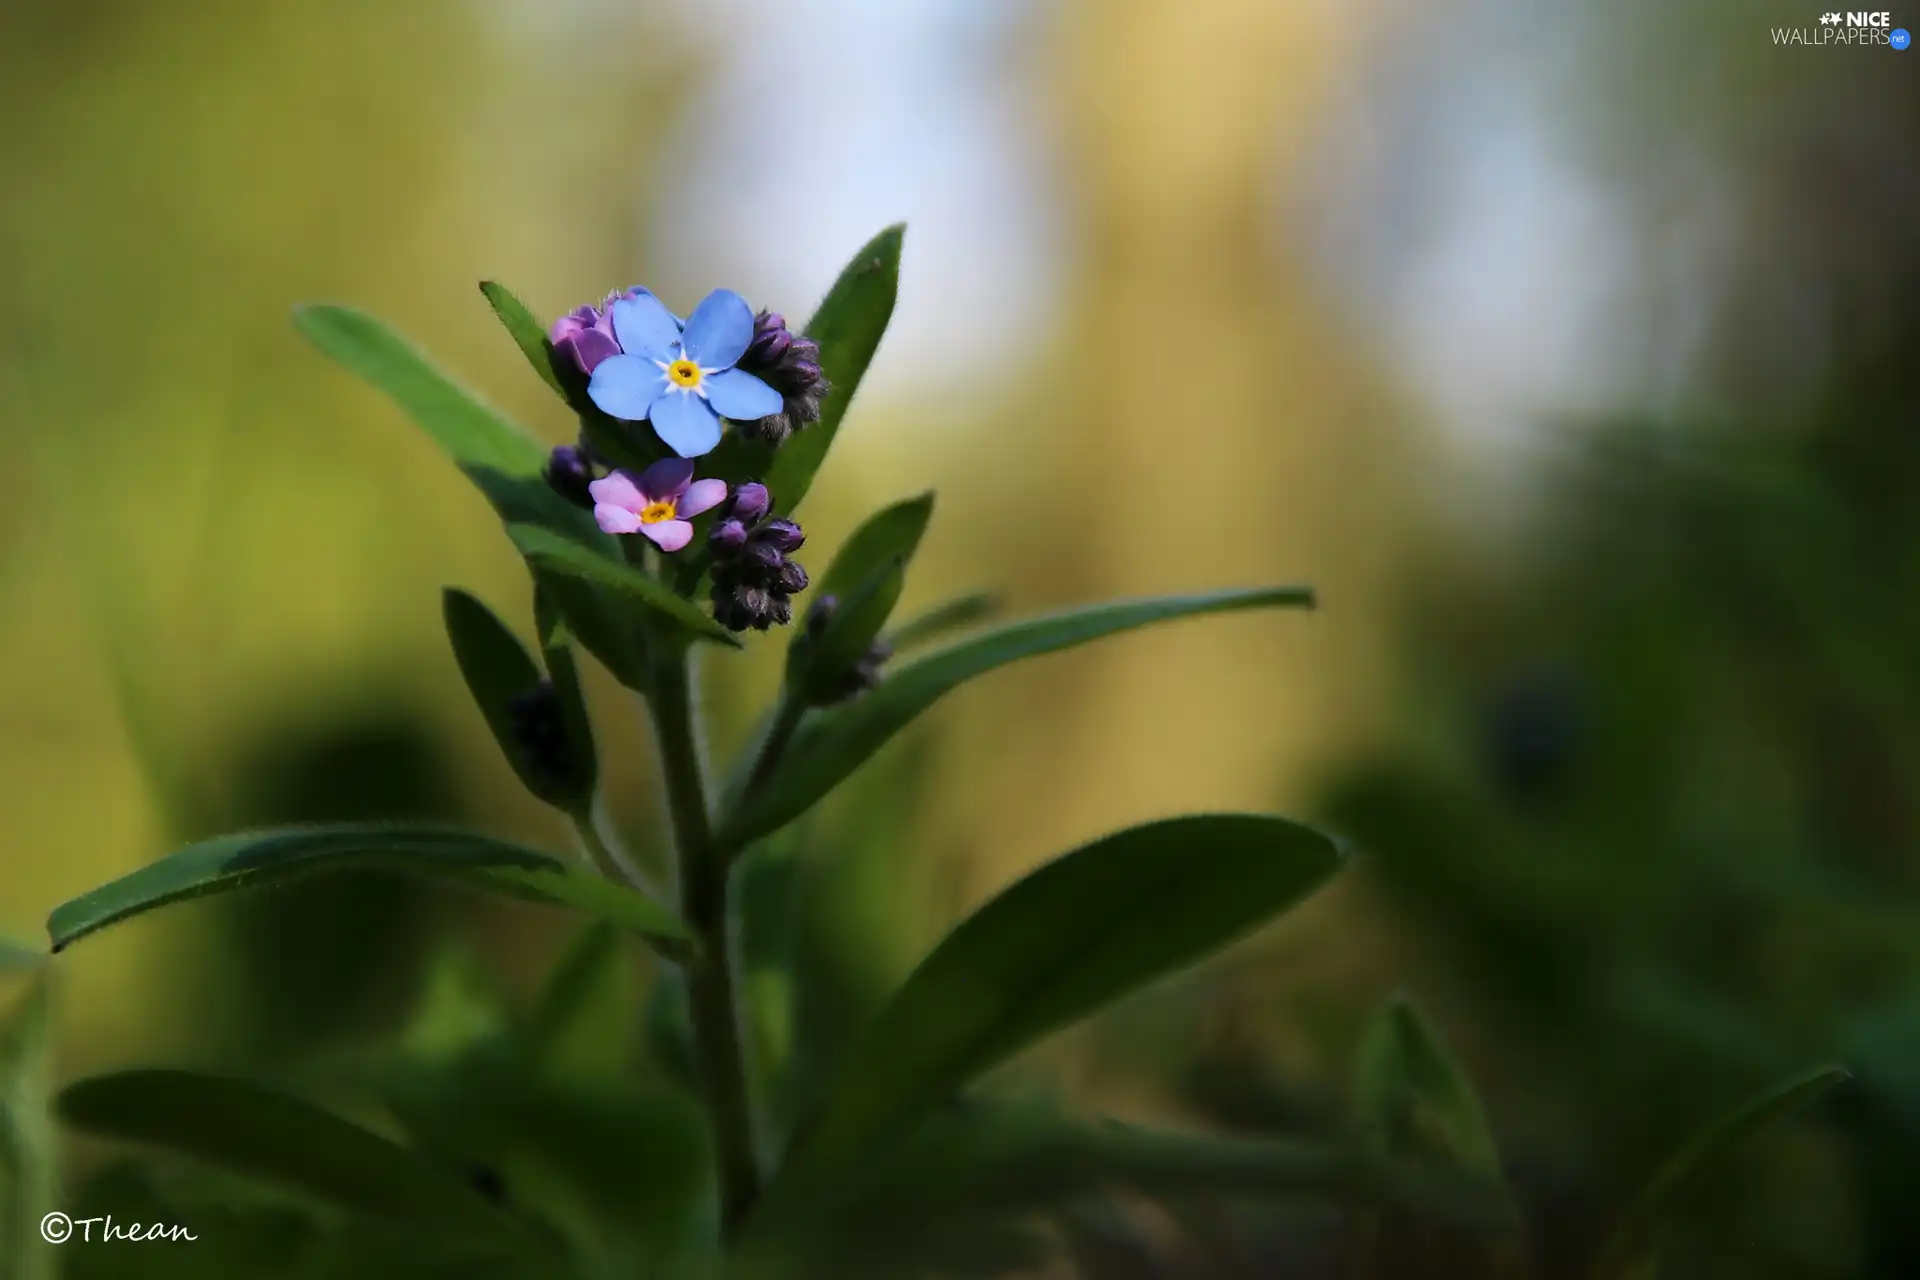 forget-me-not, Blue, Pink